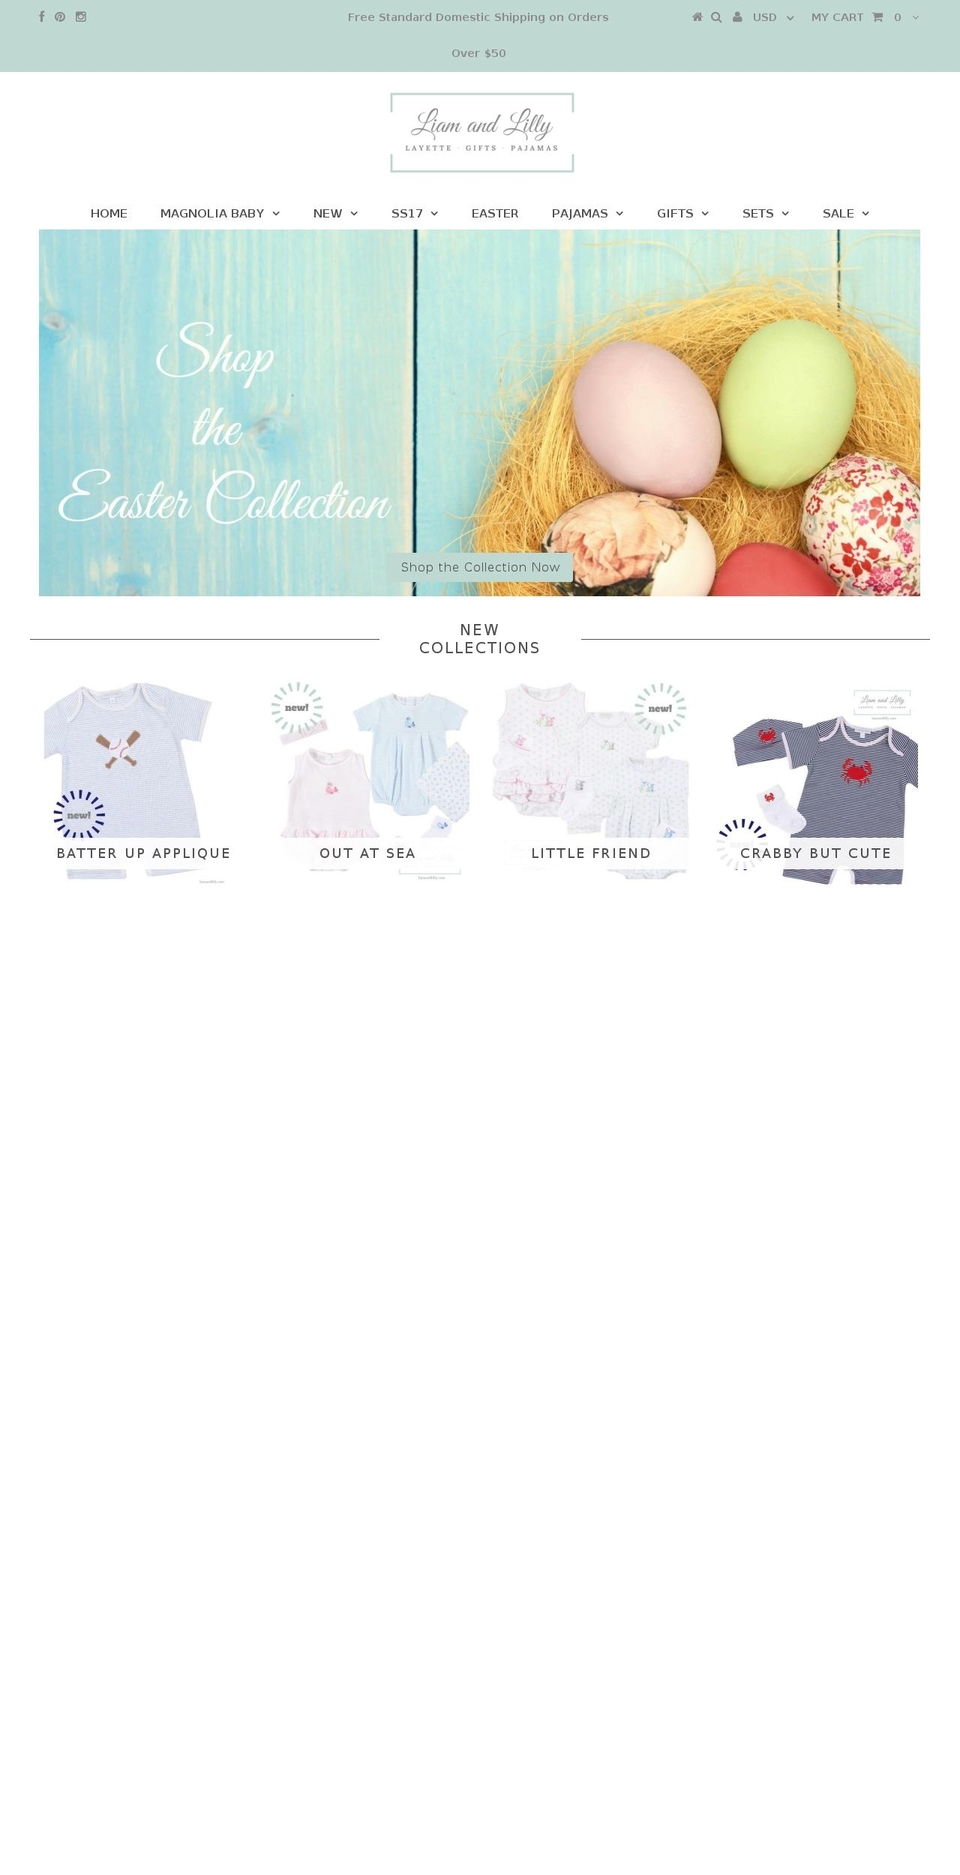 Upscale Shopify theme site example liam-and-lilly.myshopify.com